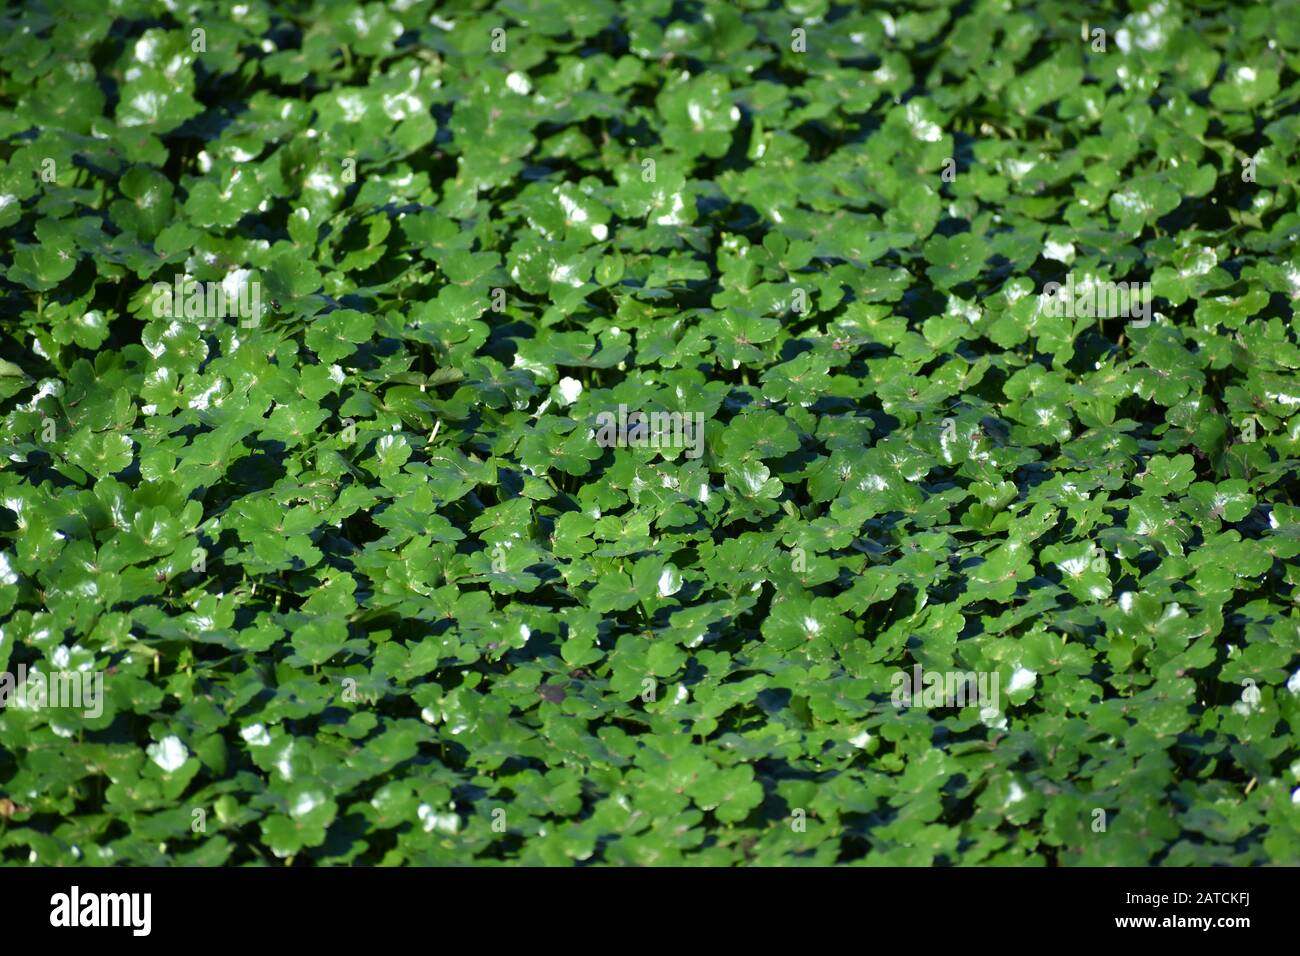 n unbroken green layer of floating pennywort (Hydrocotyle ranunculoides), a green water plant, on the surface of a small pool near Watsonville Slough, Stock Photo